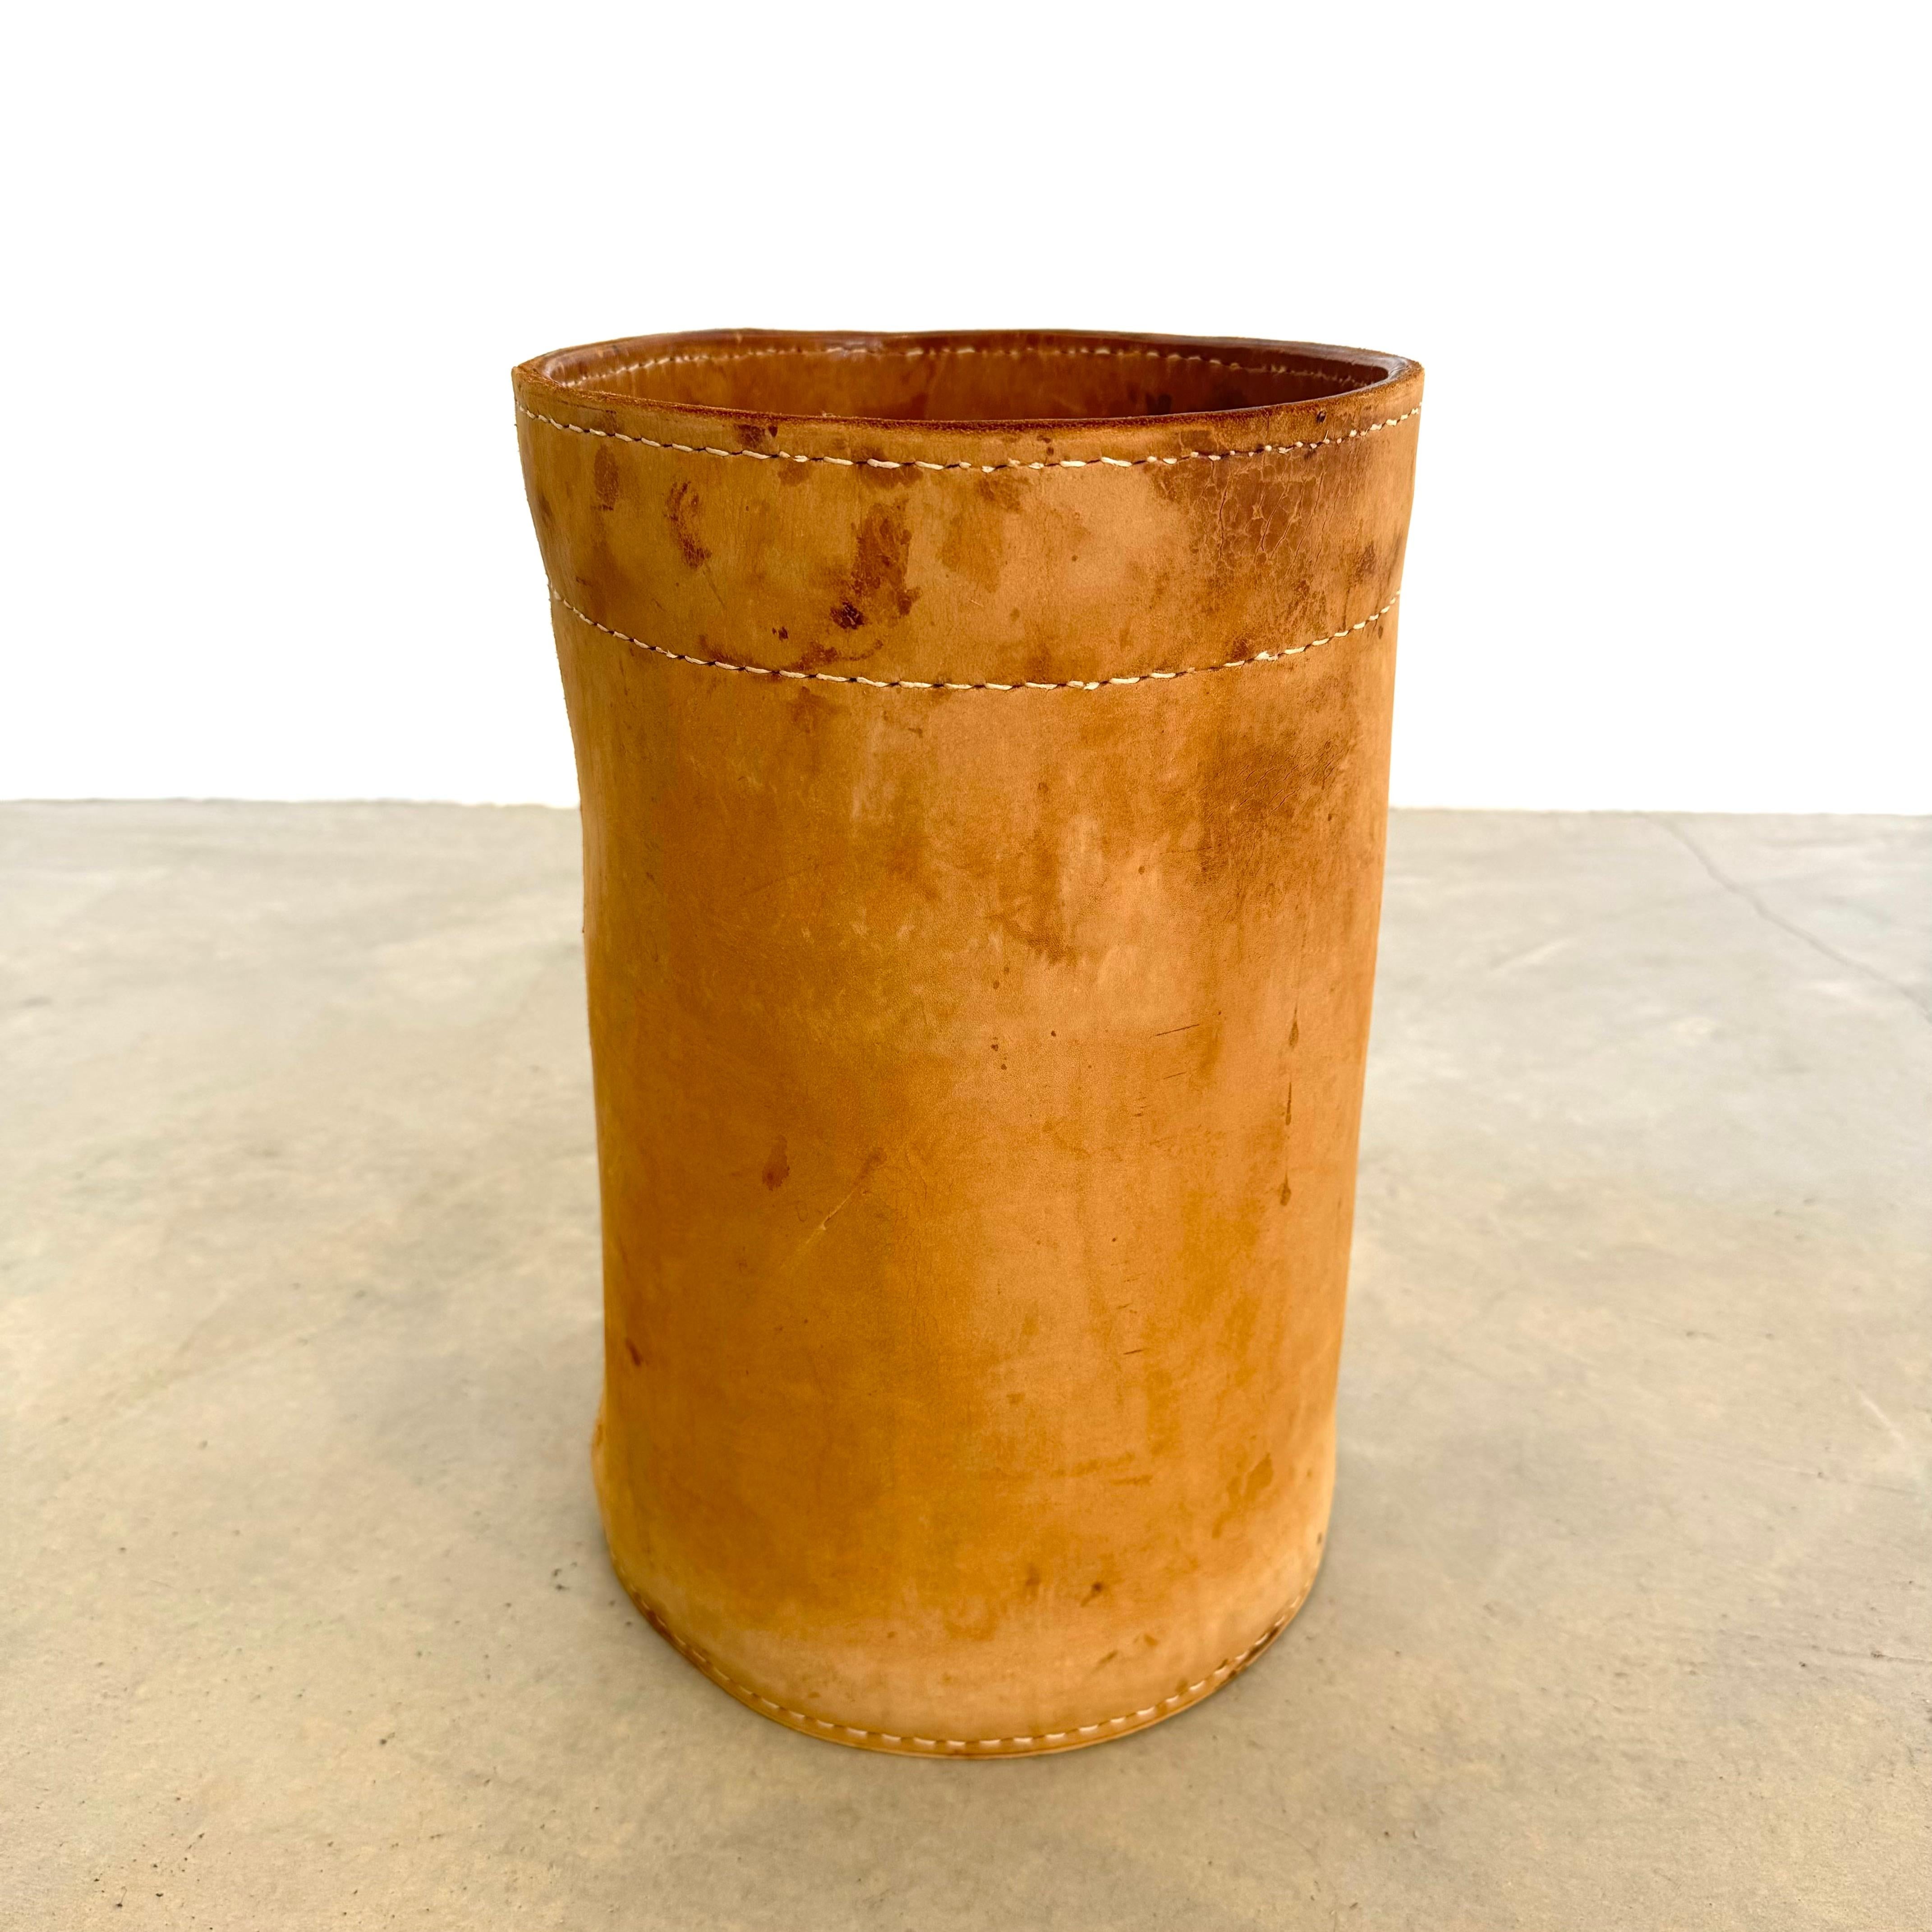 French Adnet Style Saddle Leather Waste Basket, 1950s France For Sale